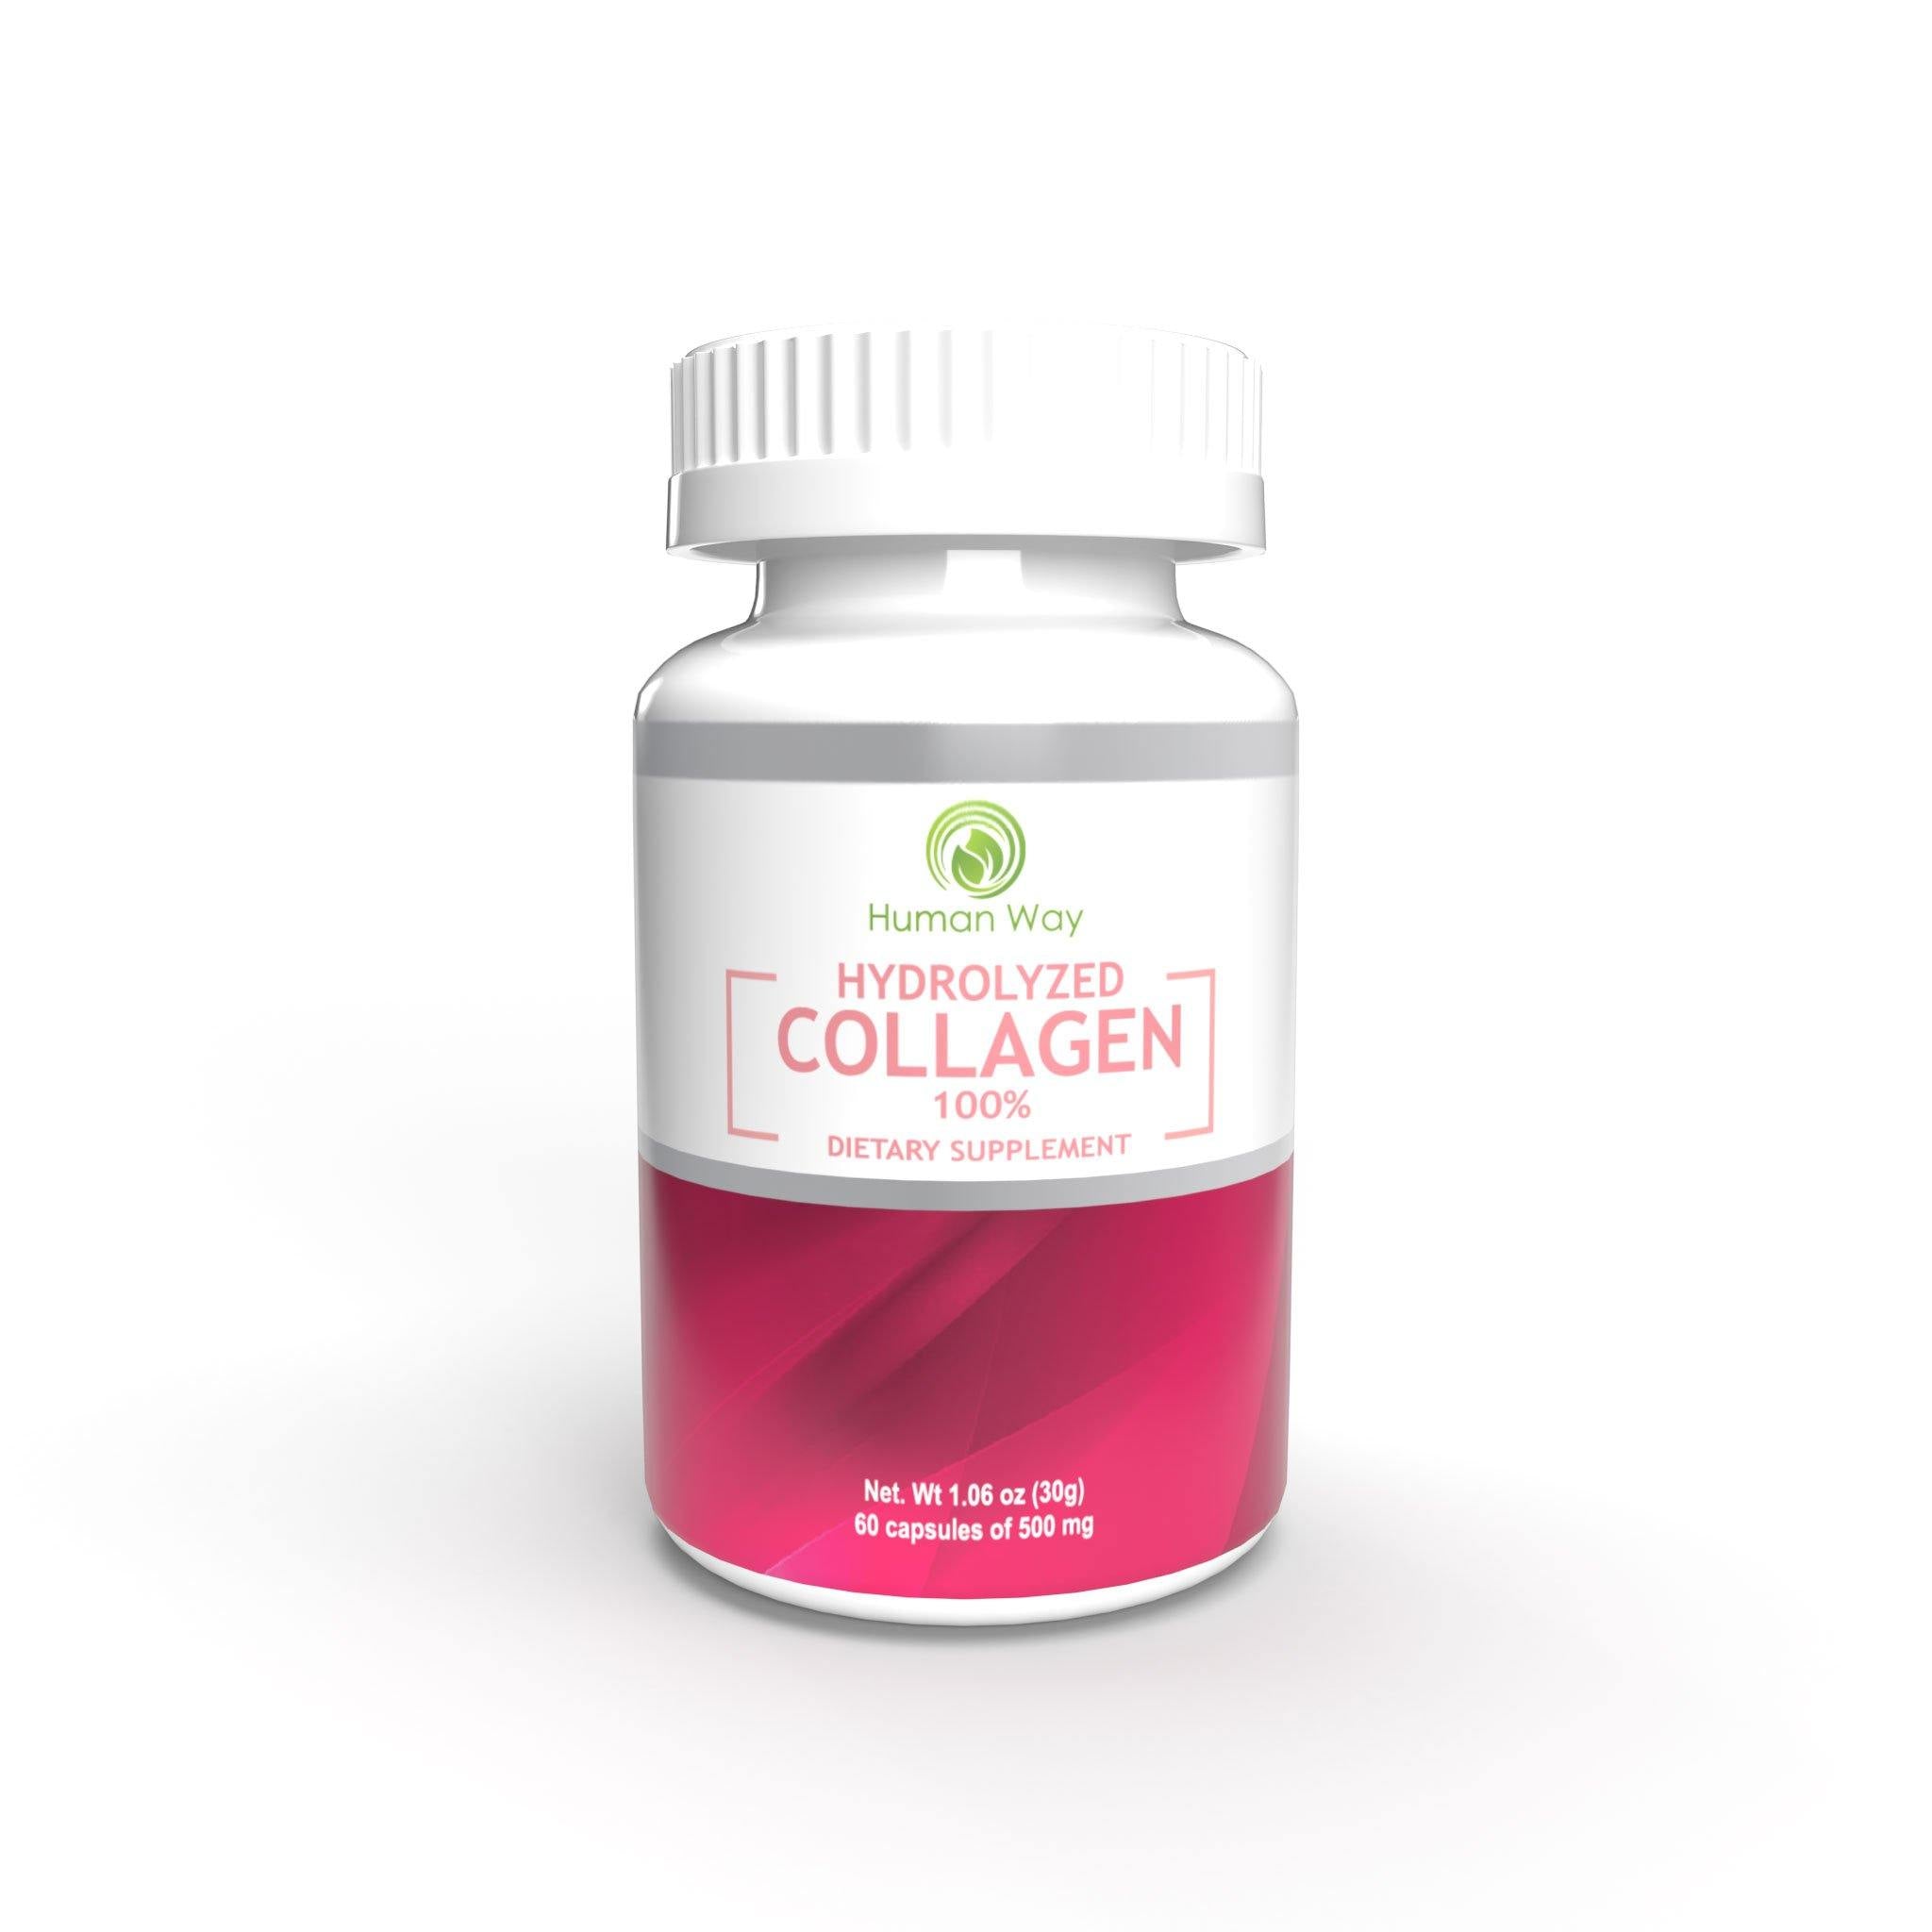 Hydrolyzed collagen help stimulate collagen growth to healthy levels. Your body produces its own collagen in abundance to make your skin, bones, hair, nails, muscles, and all your organs, but you wind up producing less and less as you get older.